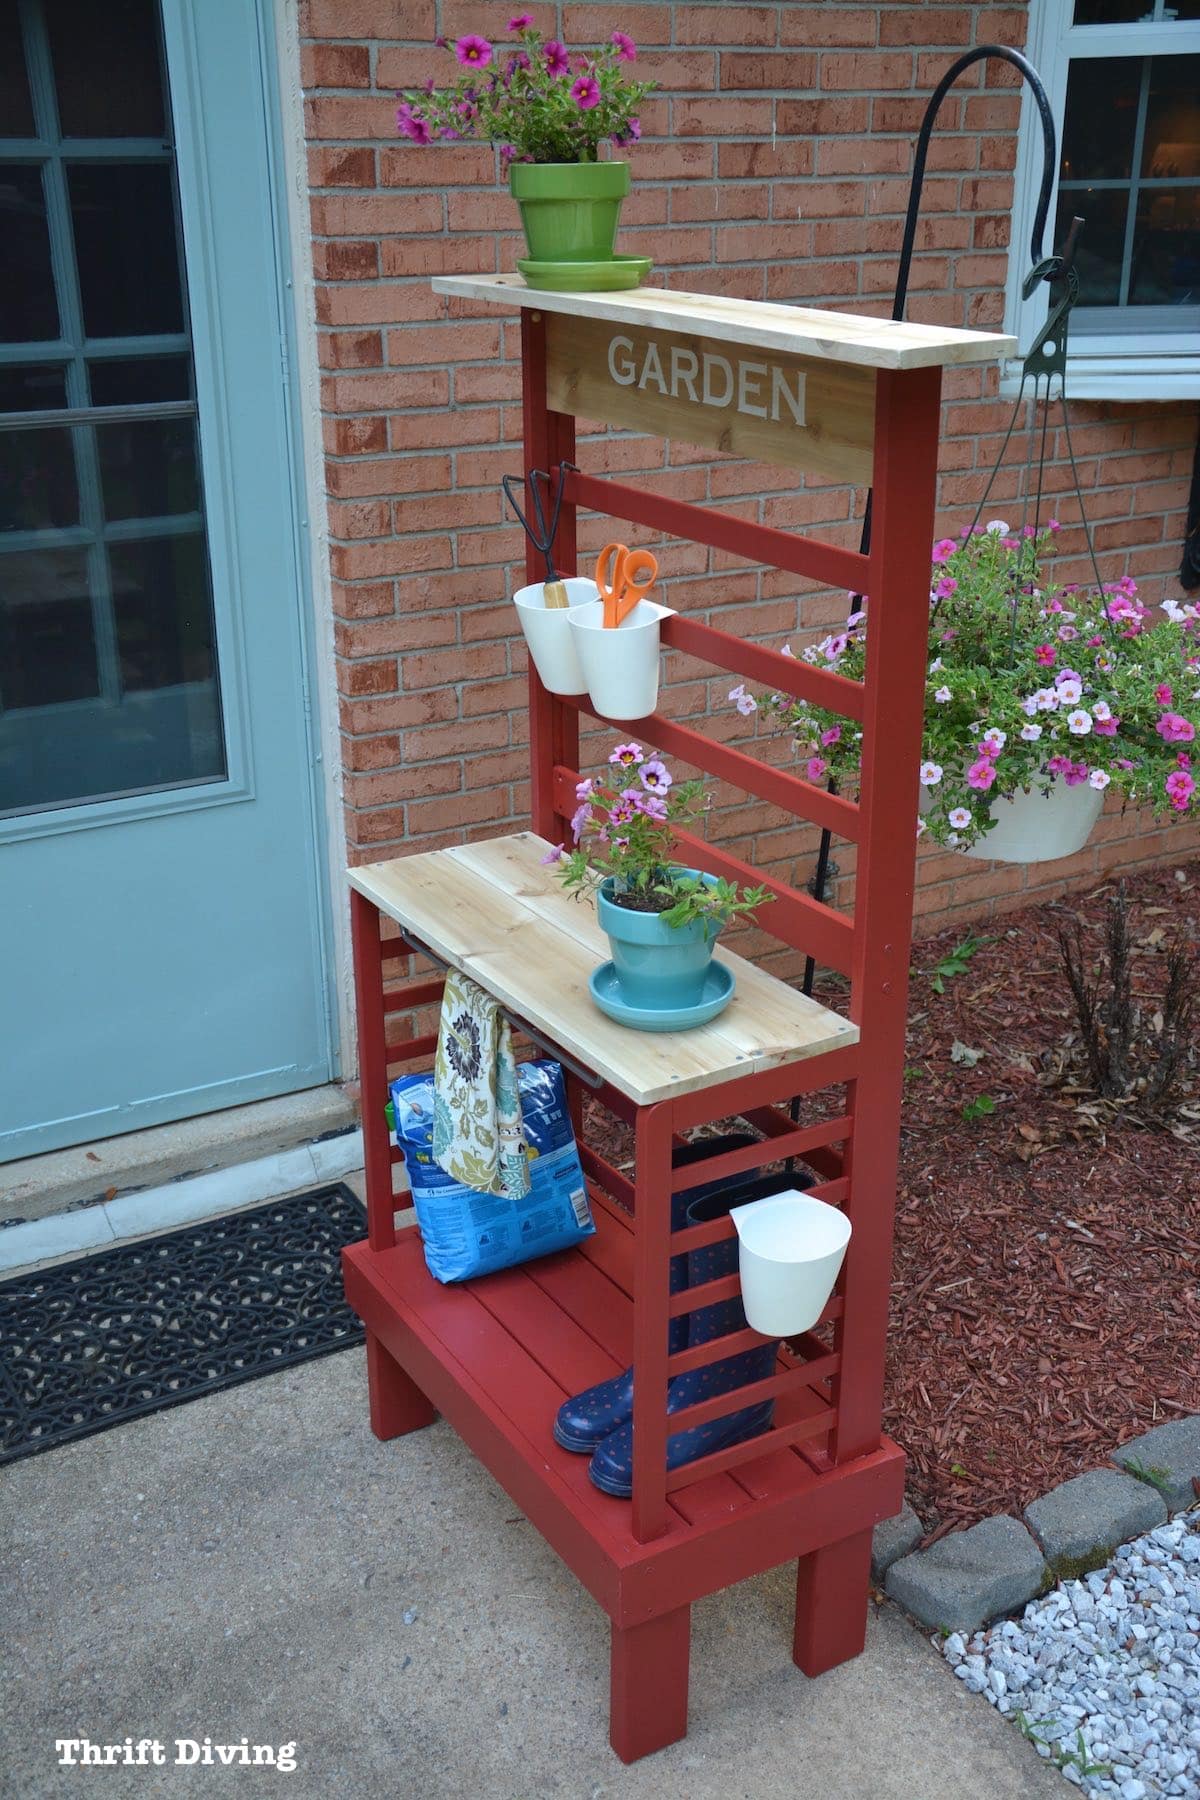 Repurposed toddler bed: What to do with an old toddler bed - Turn a toddler bed into a garden bench for your patio.- With flowers, cedar shelf, and storage. - Thrift Diving